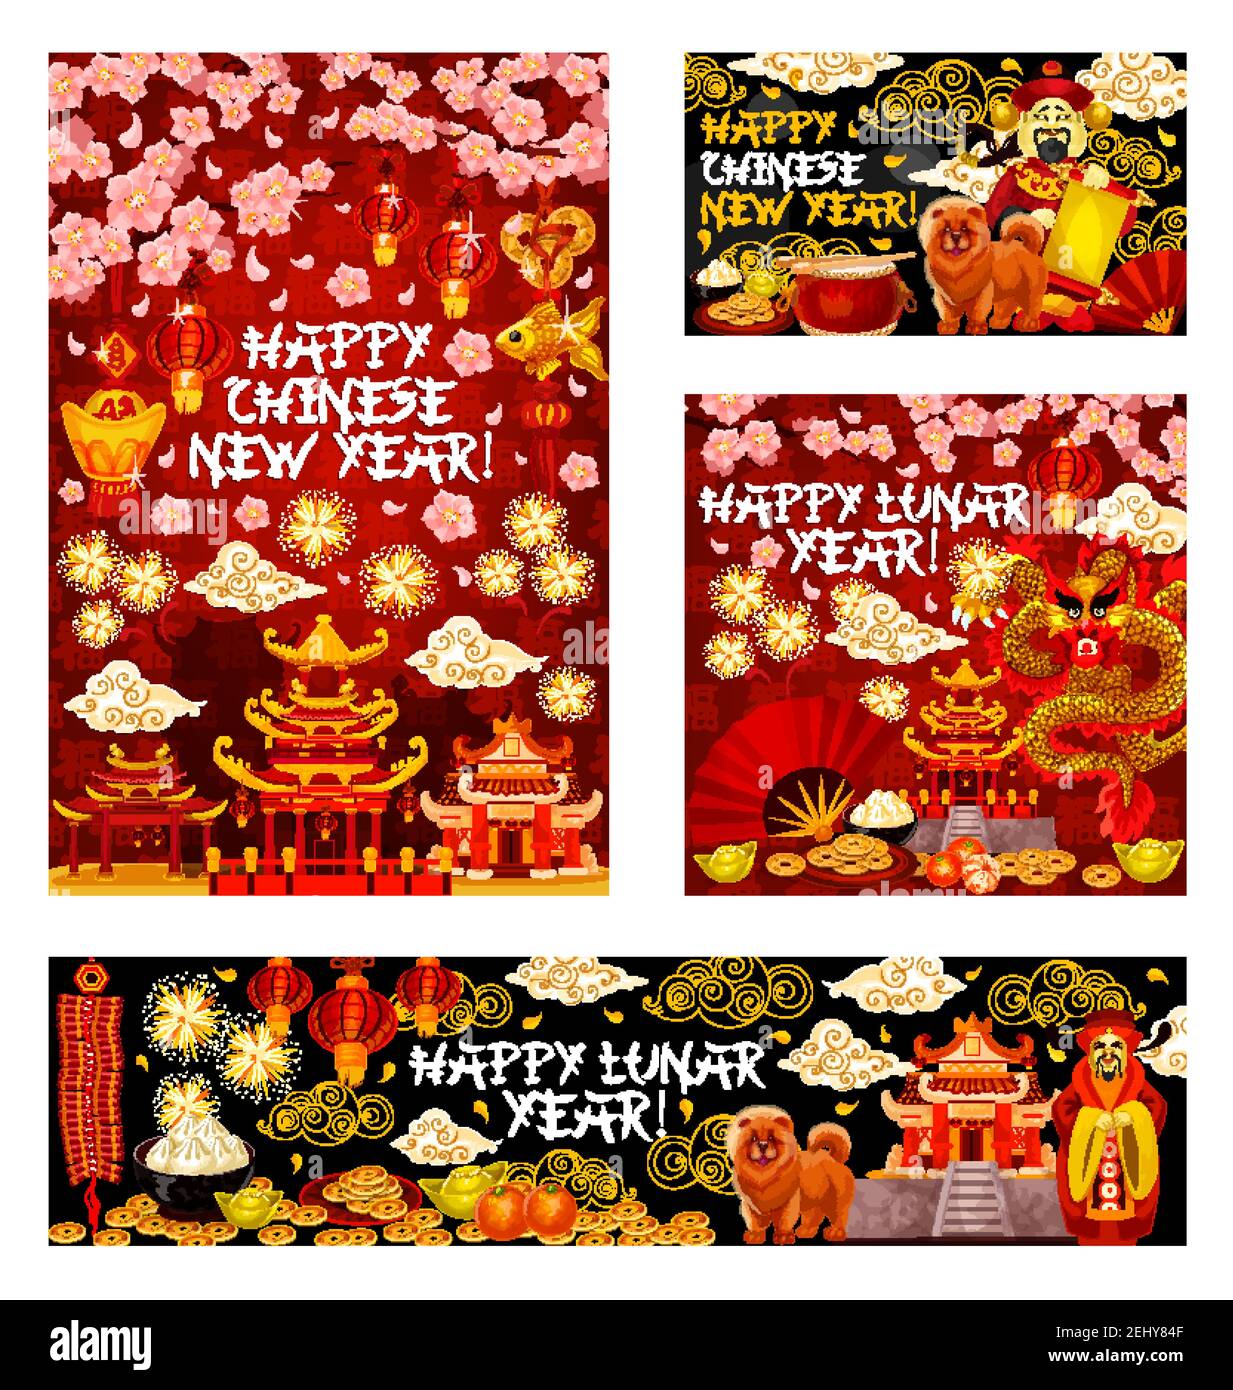 Chinese new year ornaments greeting banners Vector Image